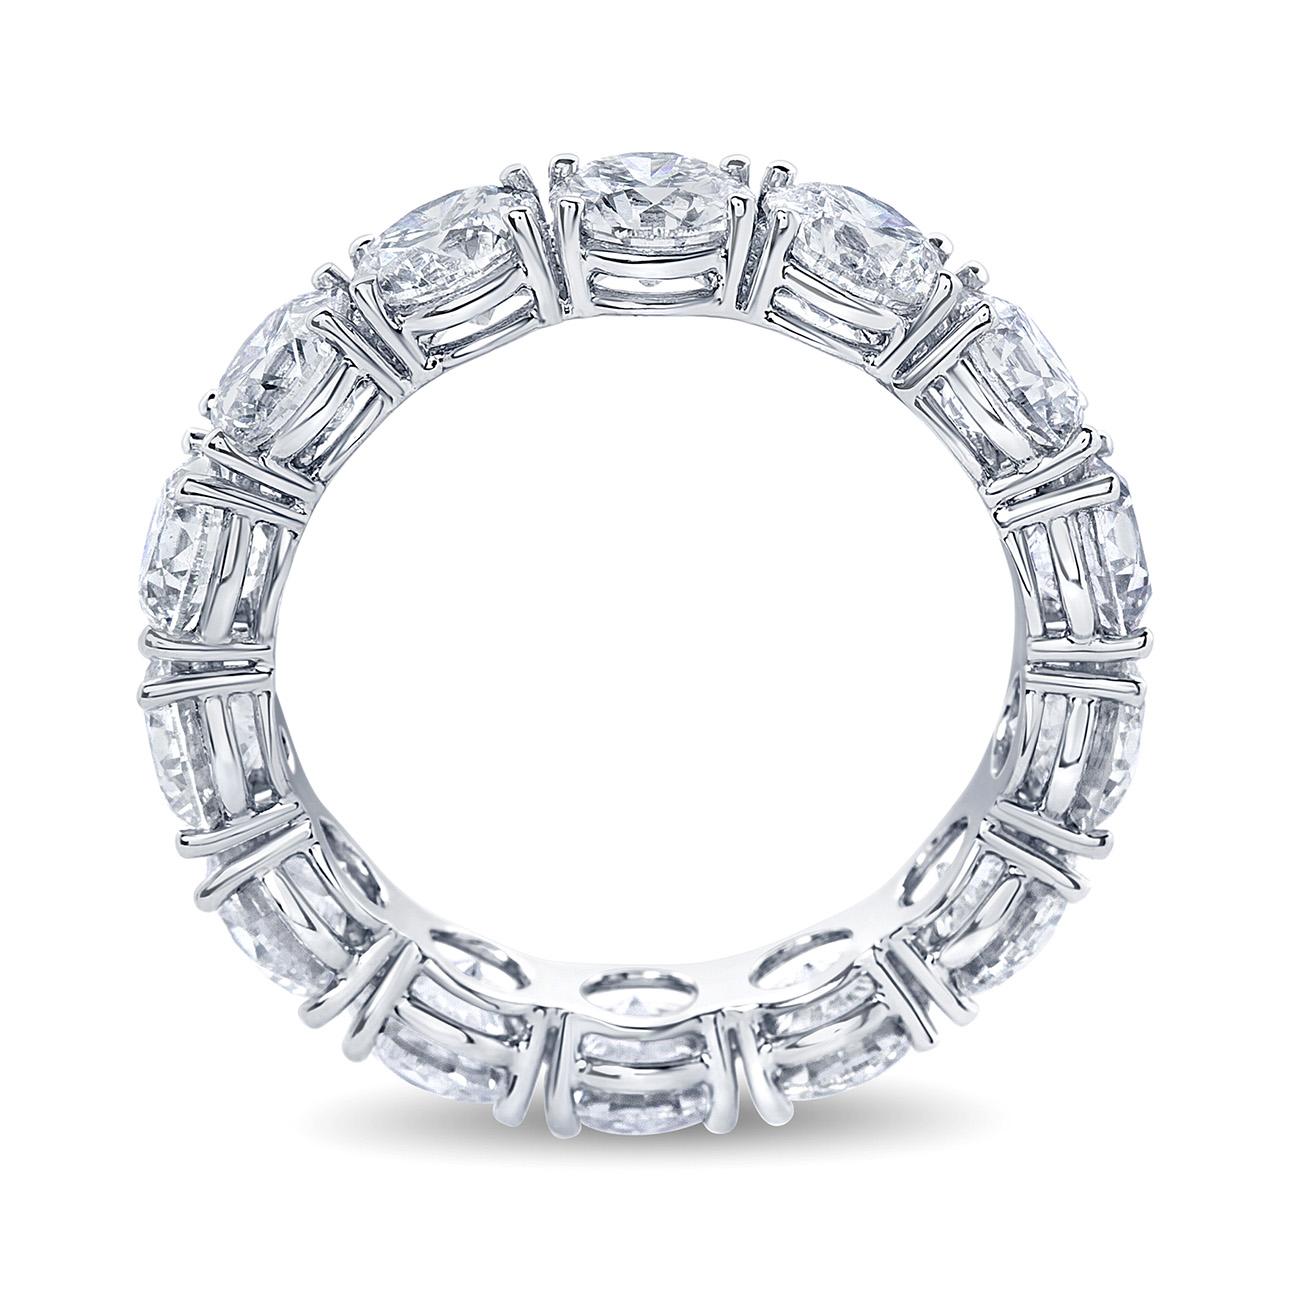 Exquisite eternity band hand crafted in 18k gold with each one of the 14 diamonds weighing over .30 carats. The Diamonds are G color, clarity with a 4.52 total carat weight.
These beautiful Diamonds are mounted in a shared prong setting, thus